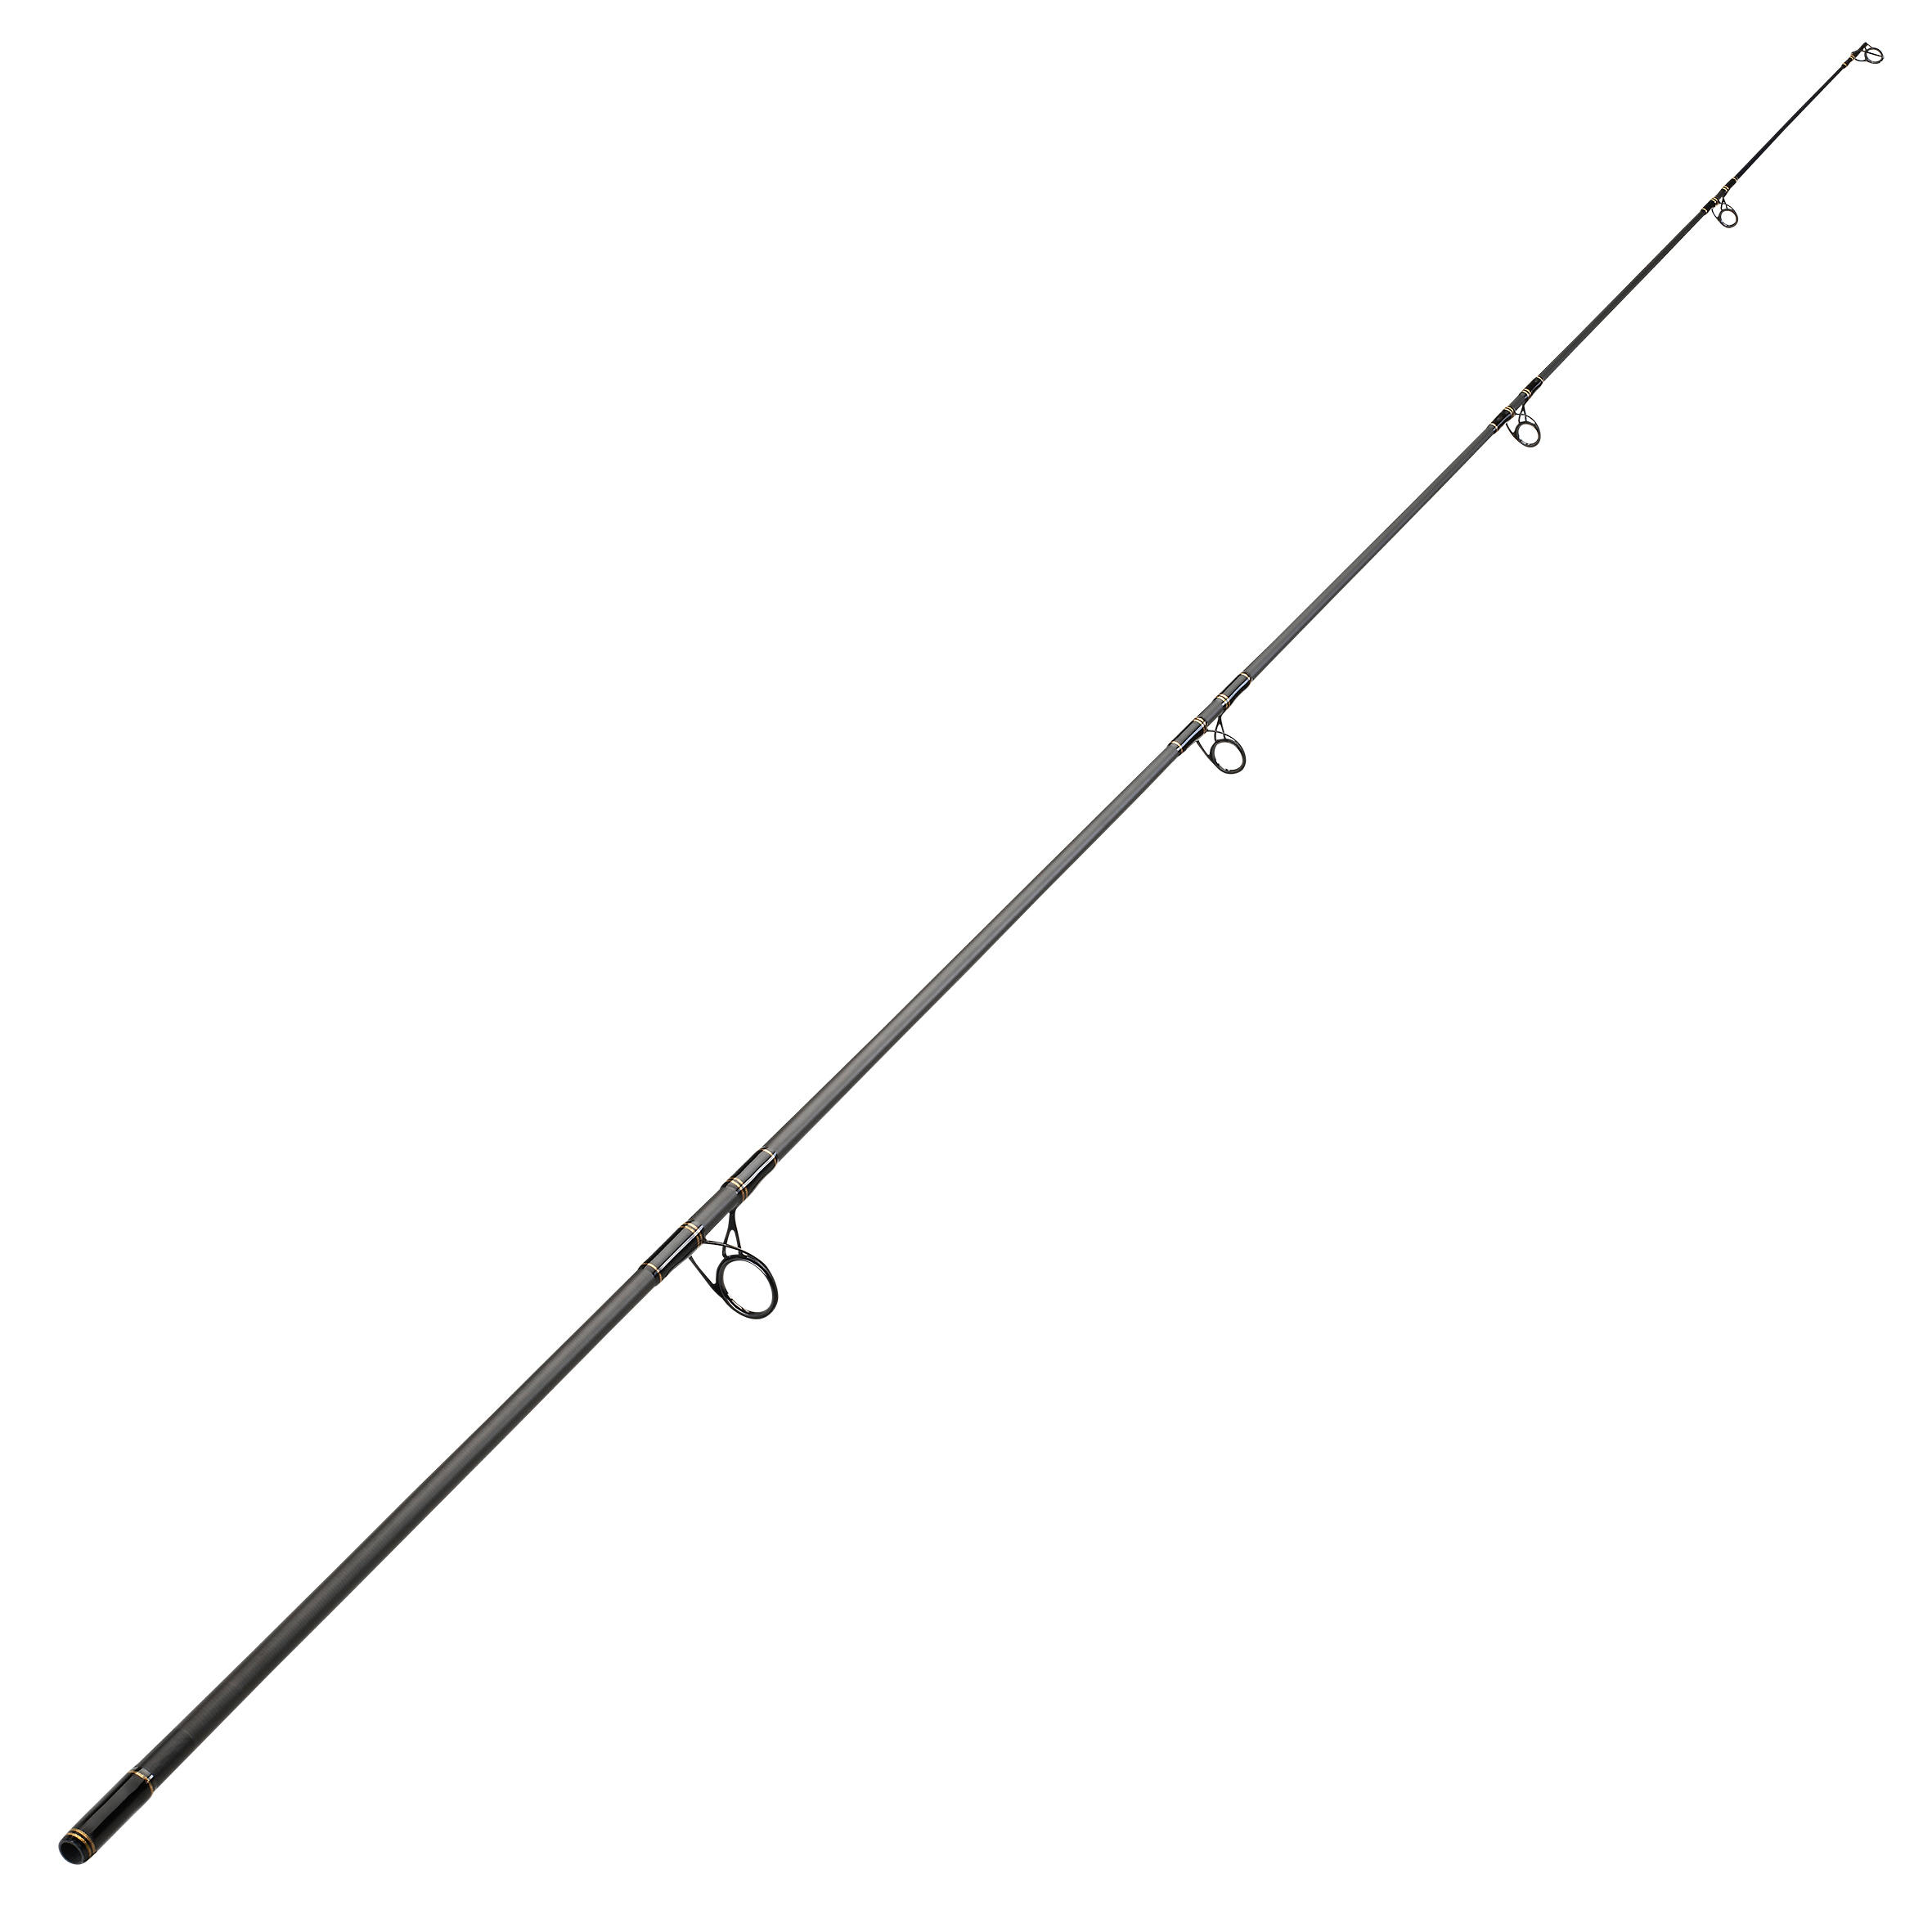 CAPERLAN Replacement tip for the Xtrem 9 Slim 390 (13 feet) rod for carp fishing.